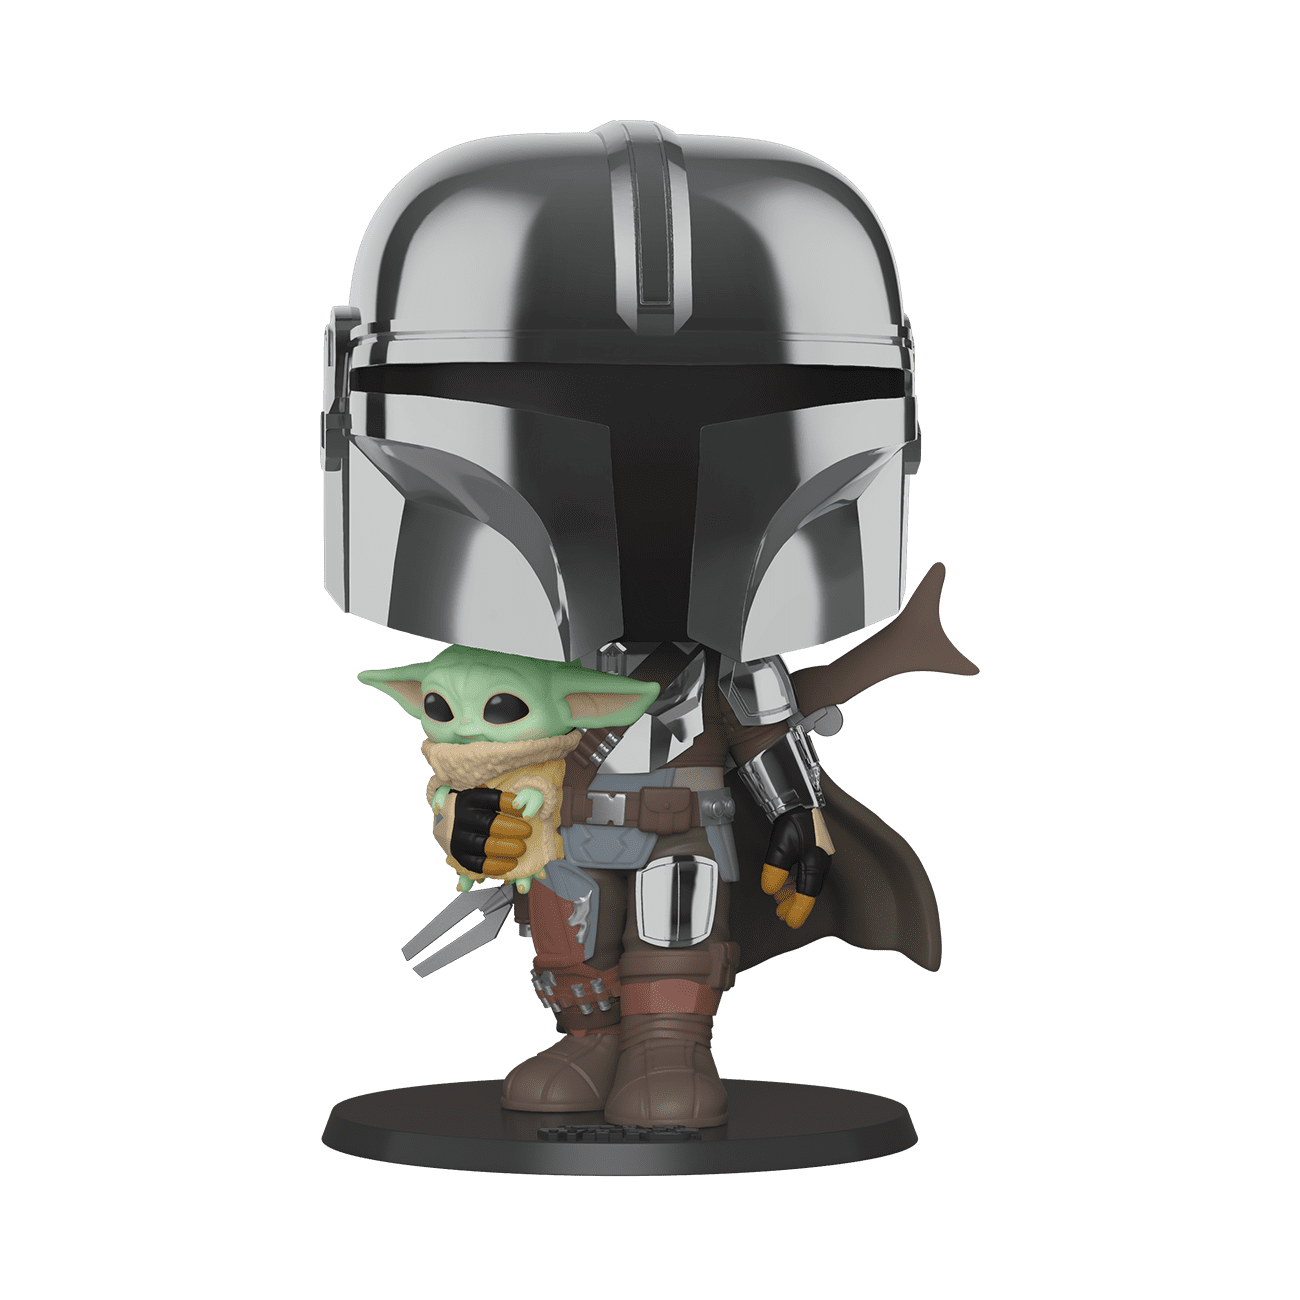 Moments Star Wars The Mandalorian with The Child for sale online Funko Pop